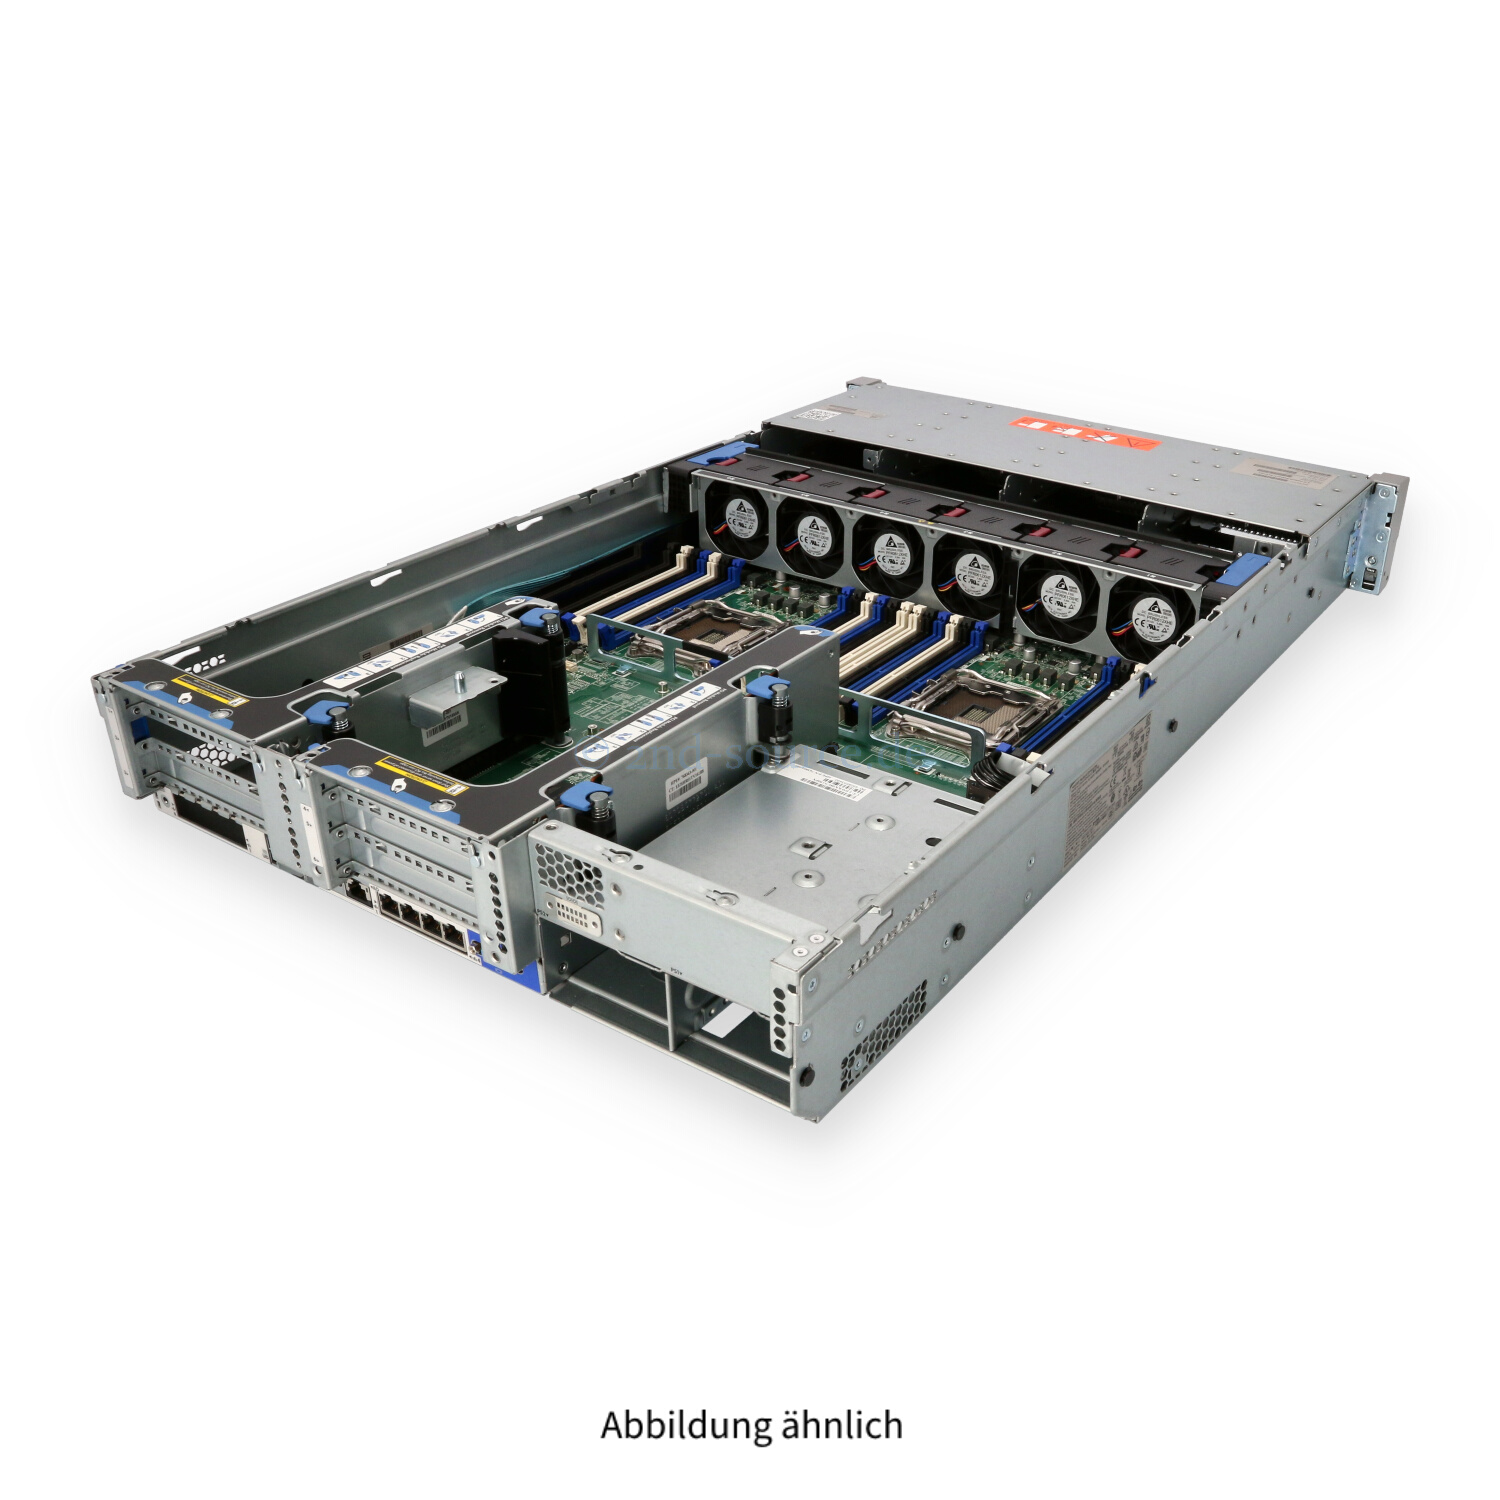 HPE DL380 G9 4x LFF CTO Chassis 767033-B21 775400-001